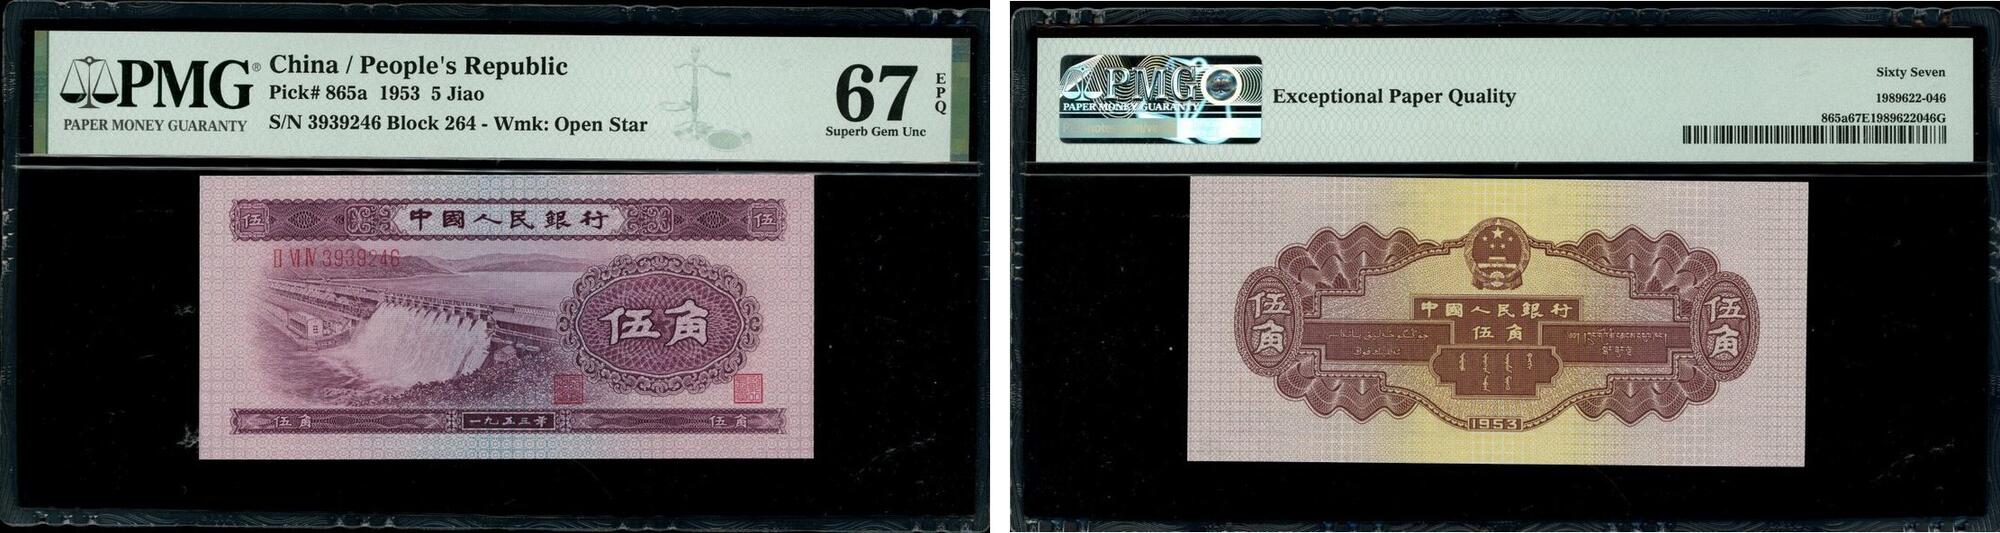 Spink Auction CSS70A (7 Nov 2021): Chinese Banknotes - NumisBids